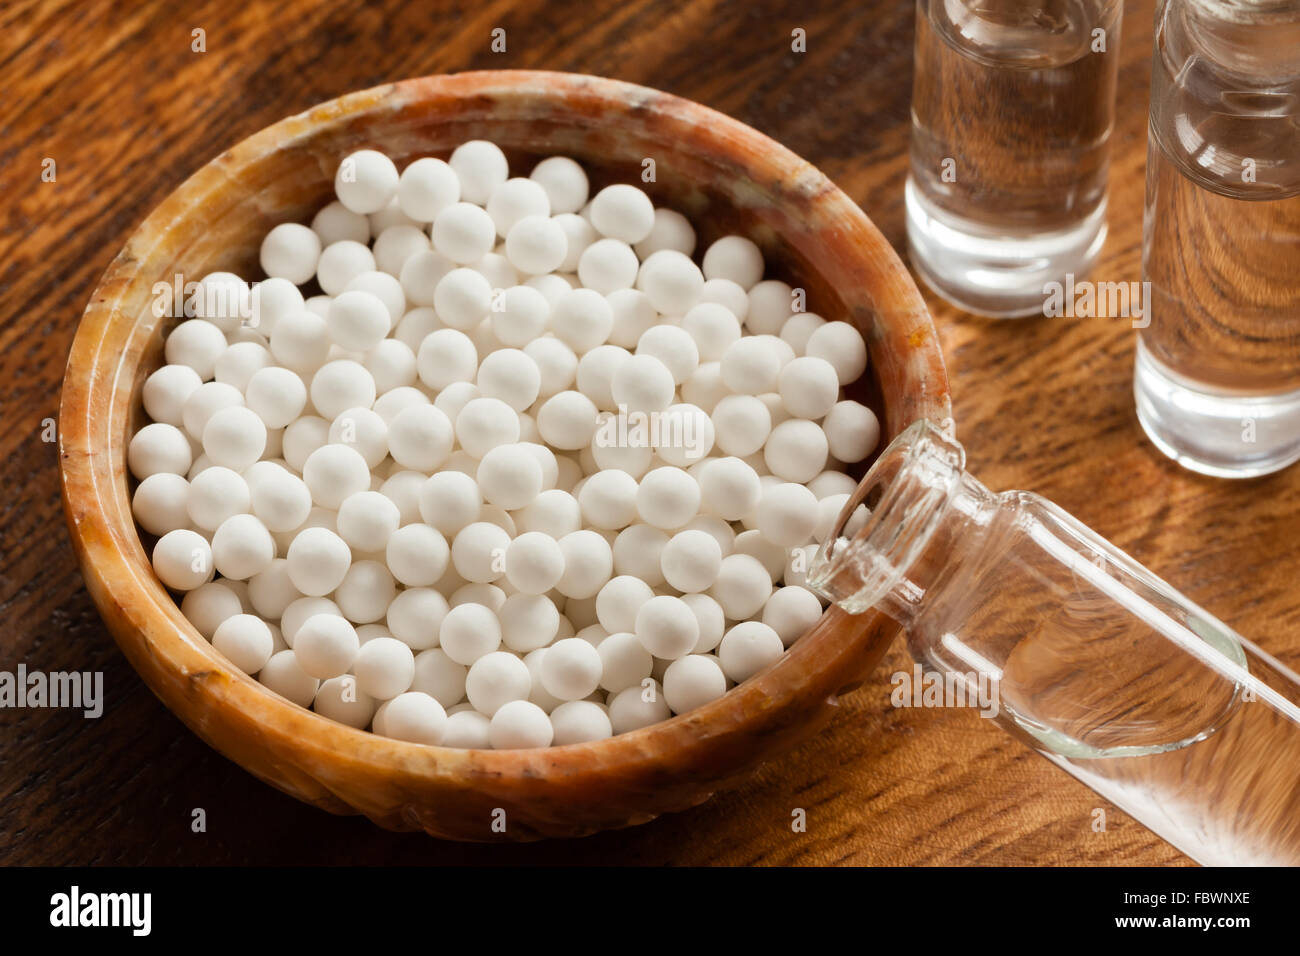 Macro image of homeopathic medicine consisting of the pills (made from an inert substance) and bottles of homeopathic liquid. Stock Photo